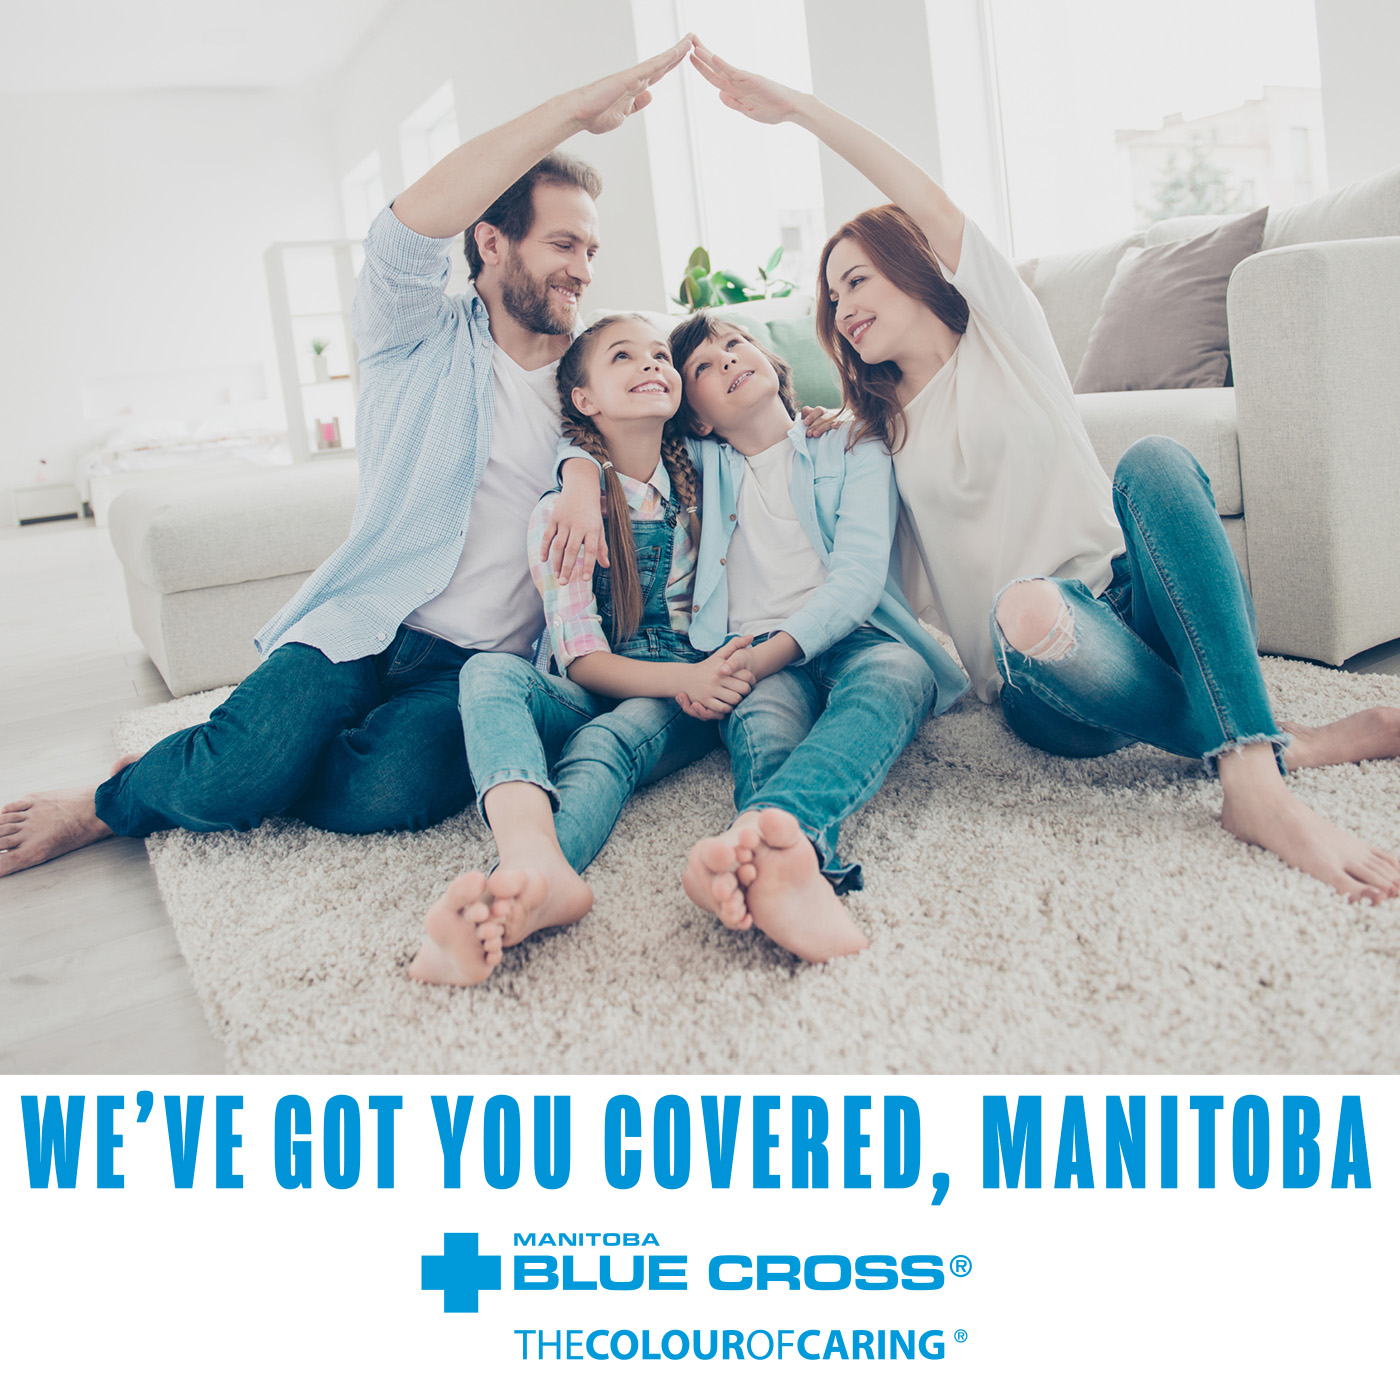 We've Got You Covered, Manitoba - How do I improve my communication skills when sending instant messages? - Presented by Manitoba Blue Cross